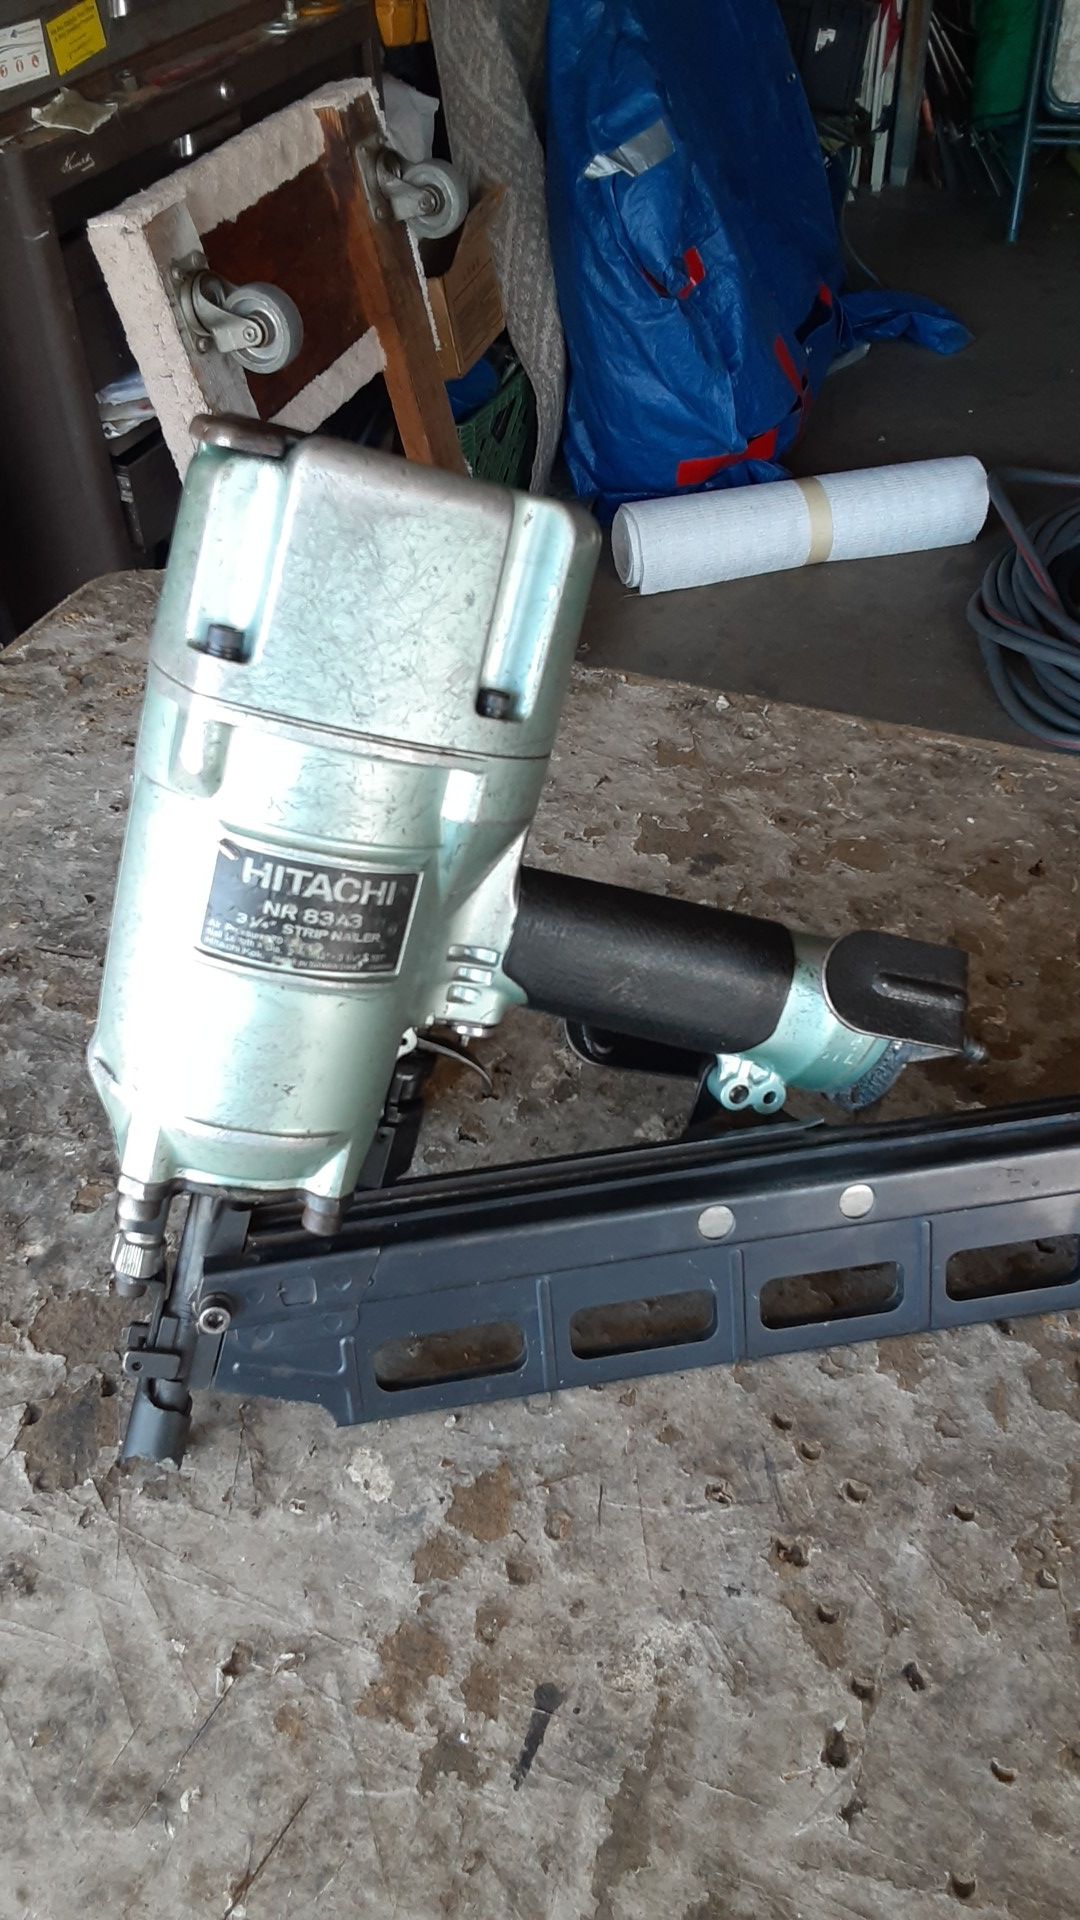 Hitachi freiming nailer NR 83A3 used good condition